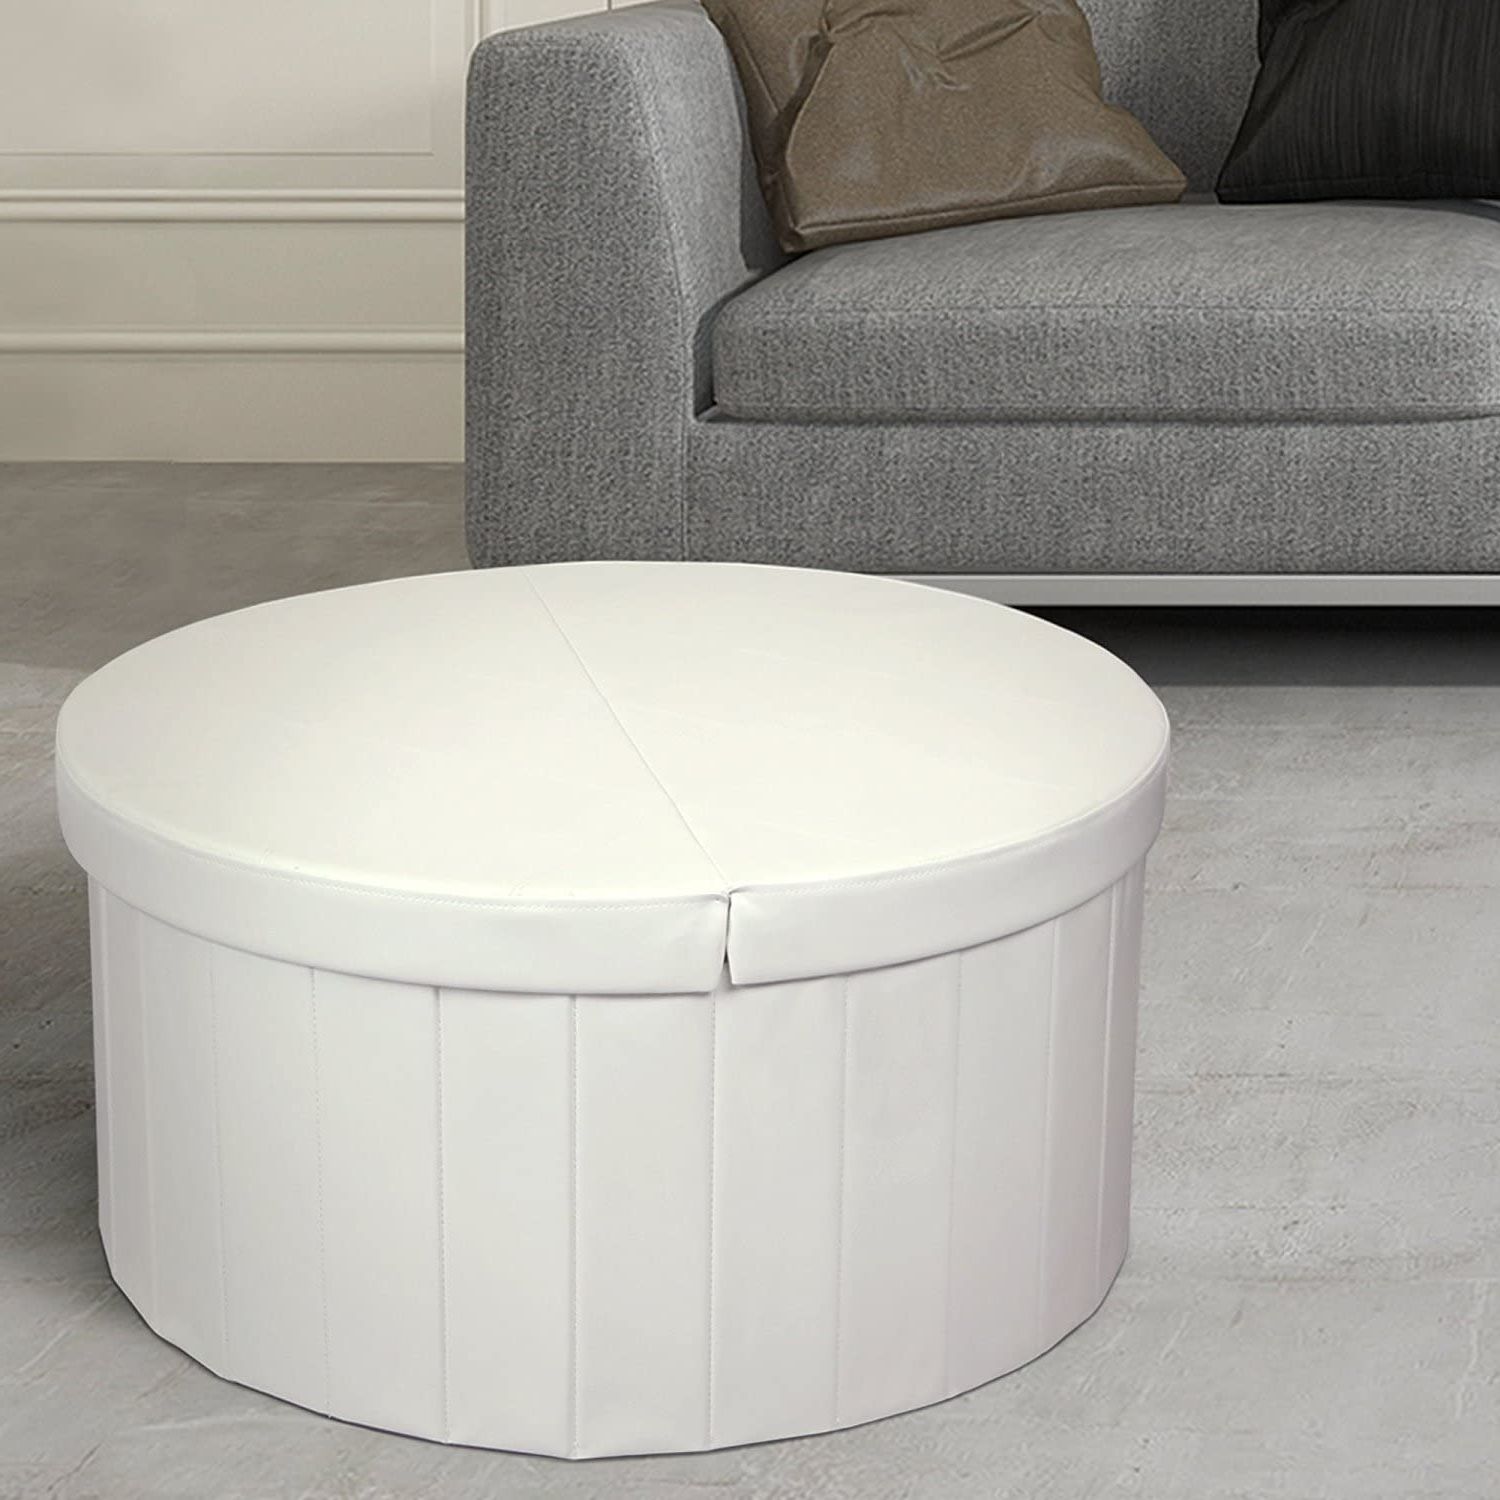 White Large Round Ottomans With Regard To Most Current Best Round White Leather Ottoman Tufted – Your House (View 3 of 10)